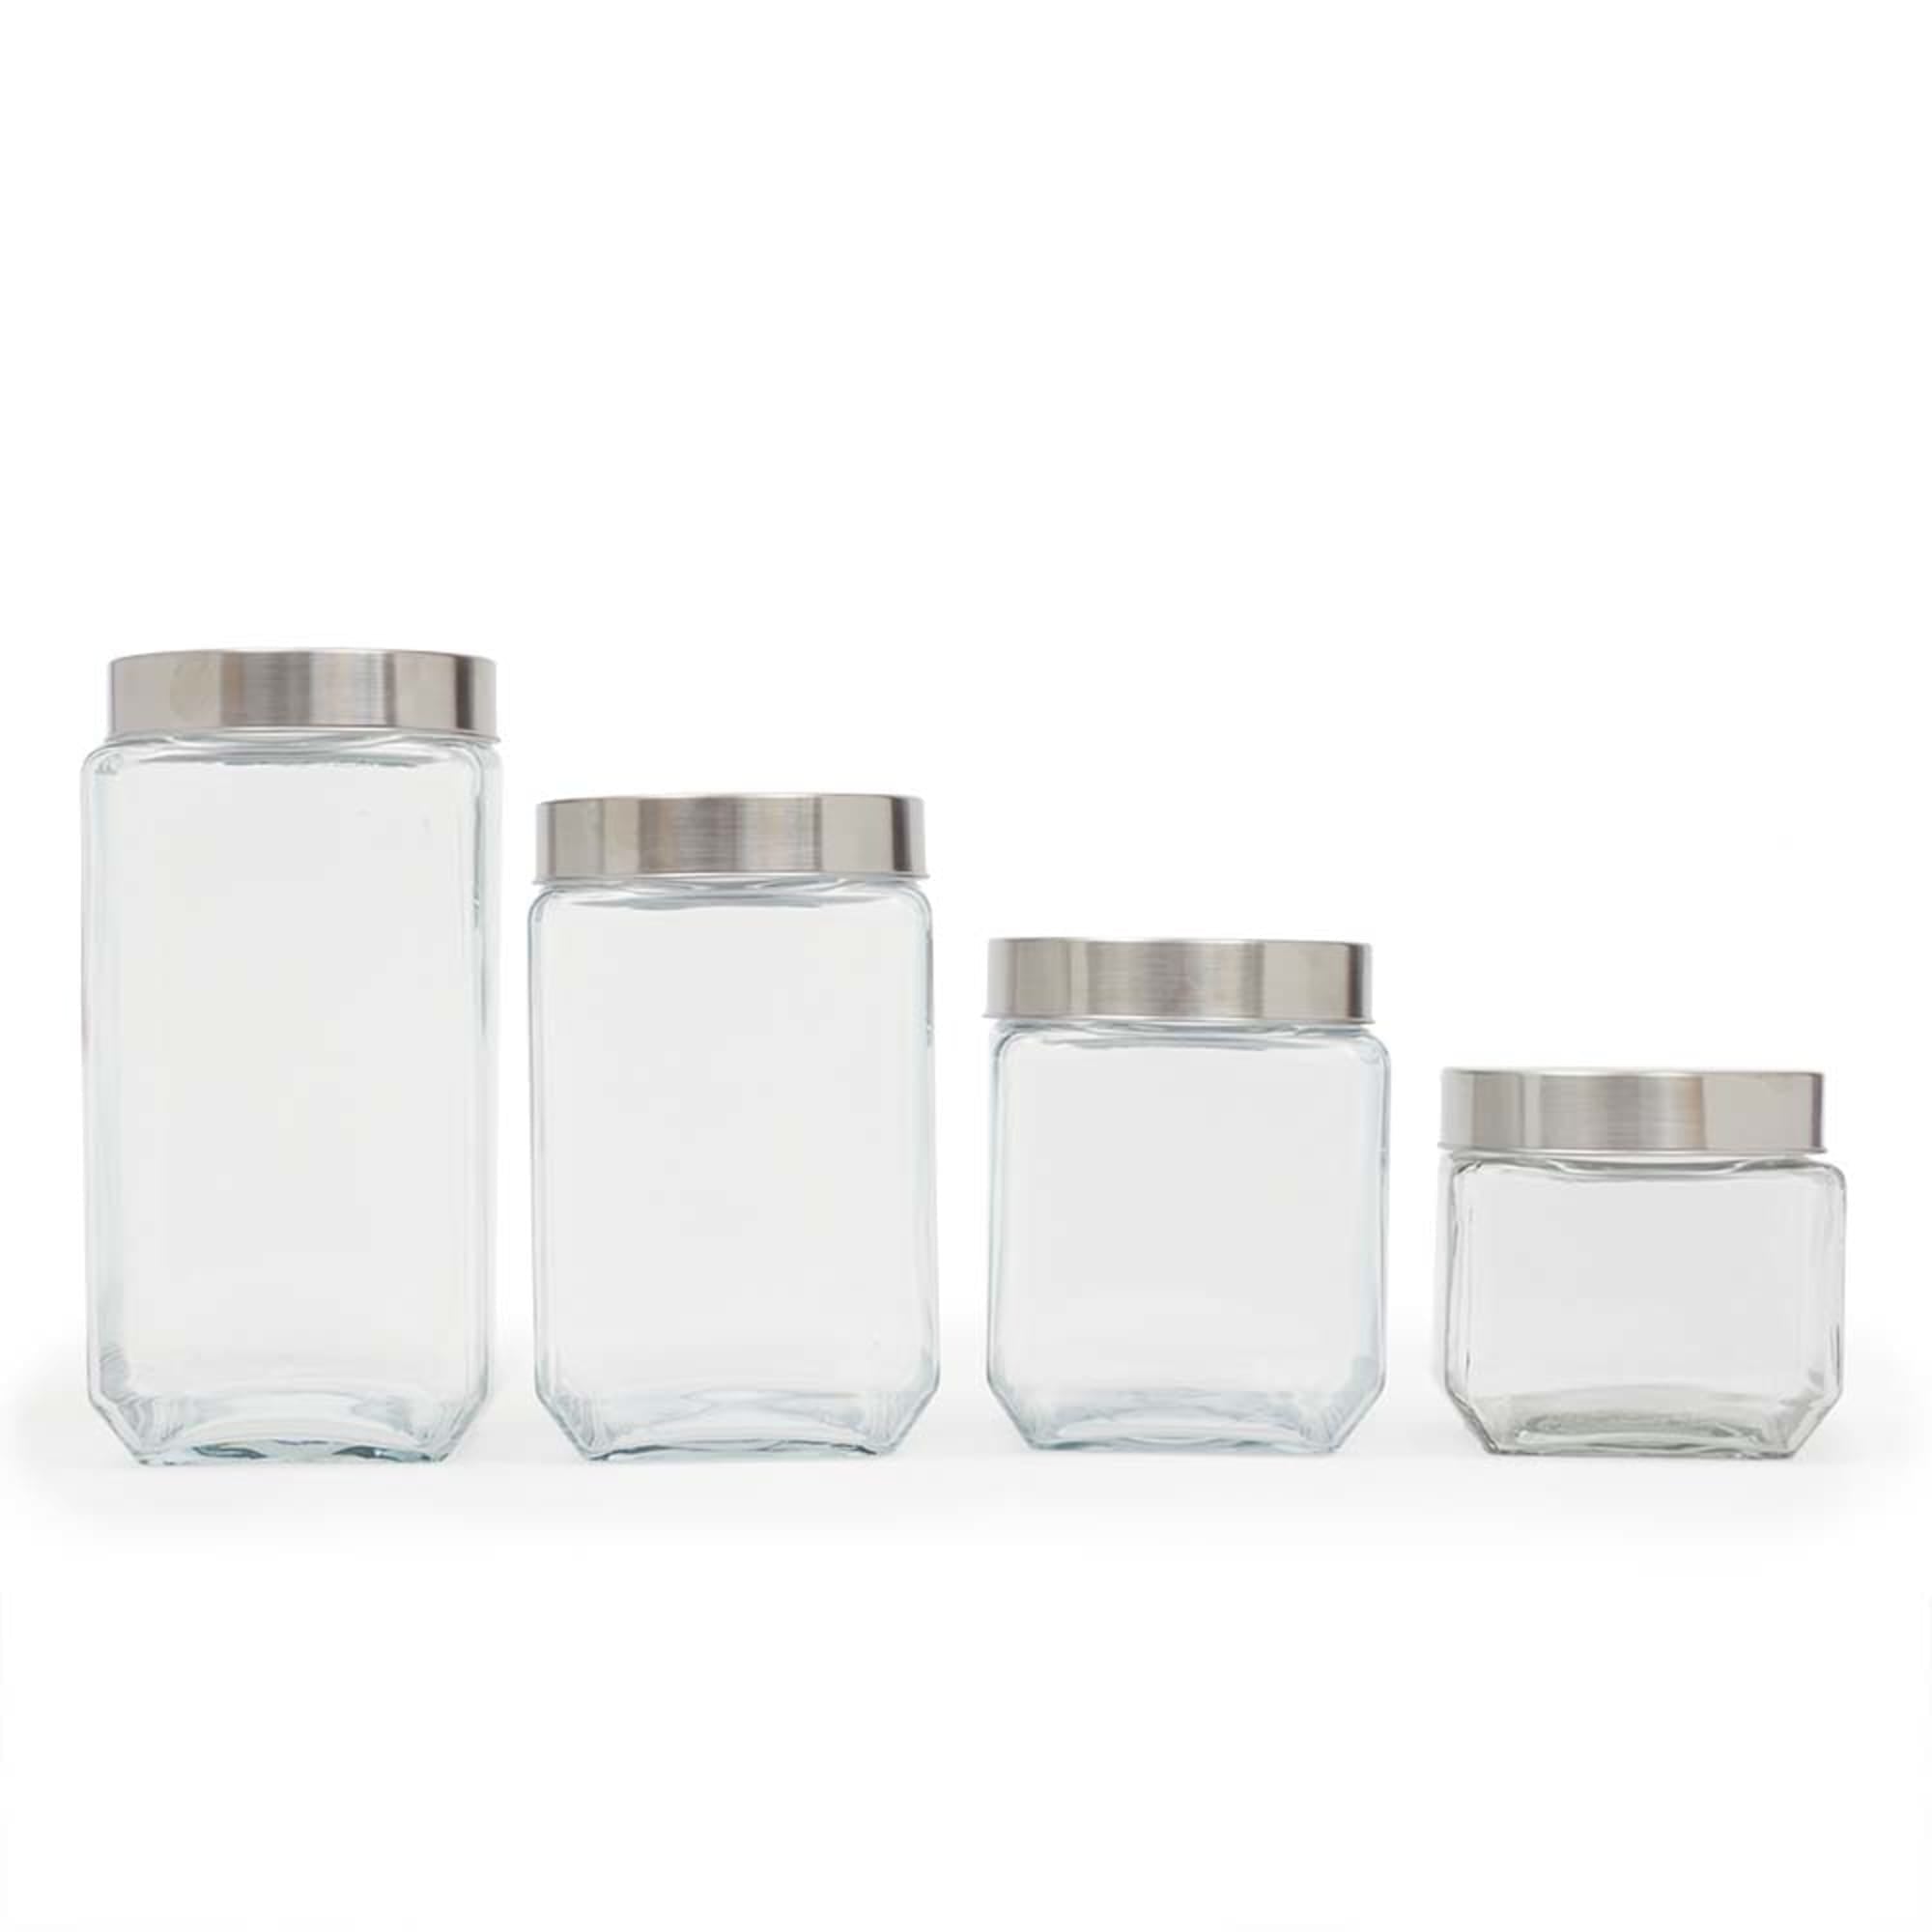 Home Basics 4 Piece Canister Set with Stainless Steel Lids $15.00 EACH, CASE PACK OF 6